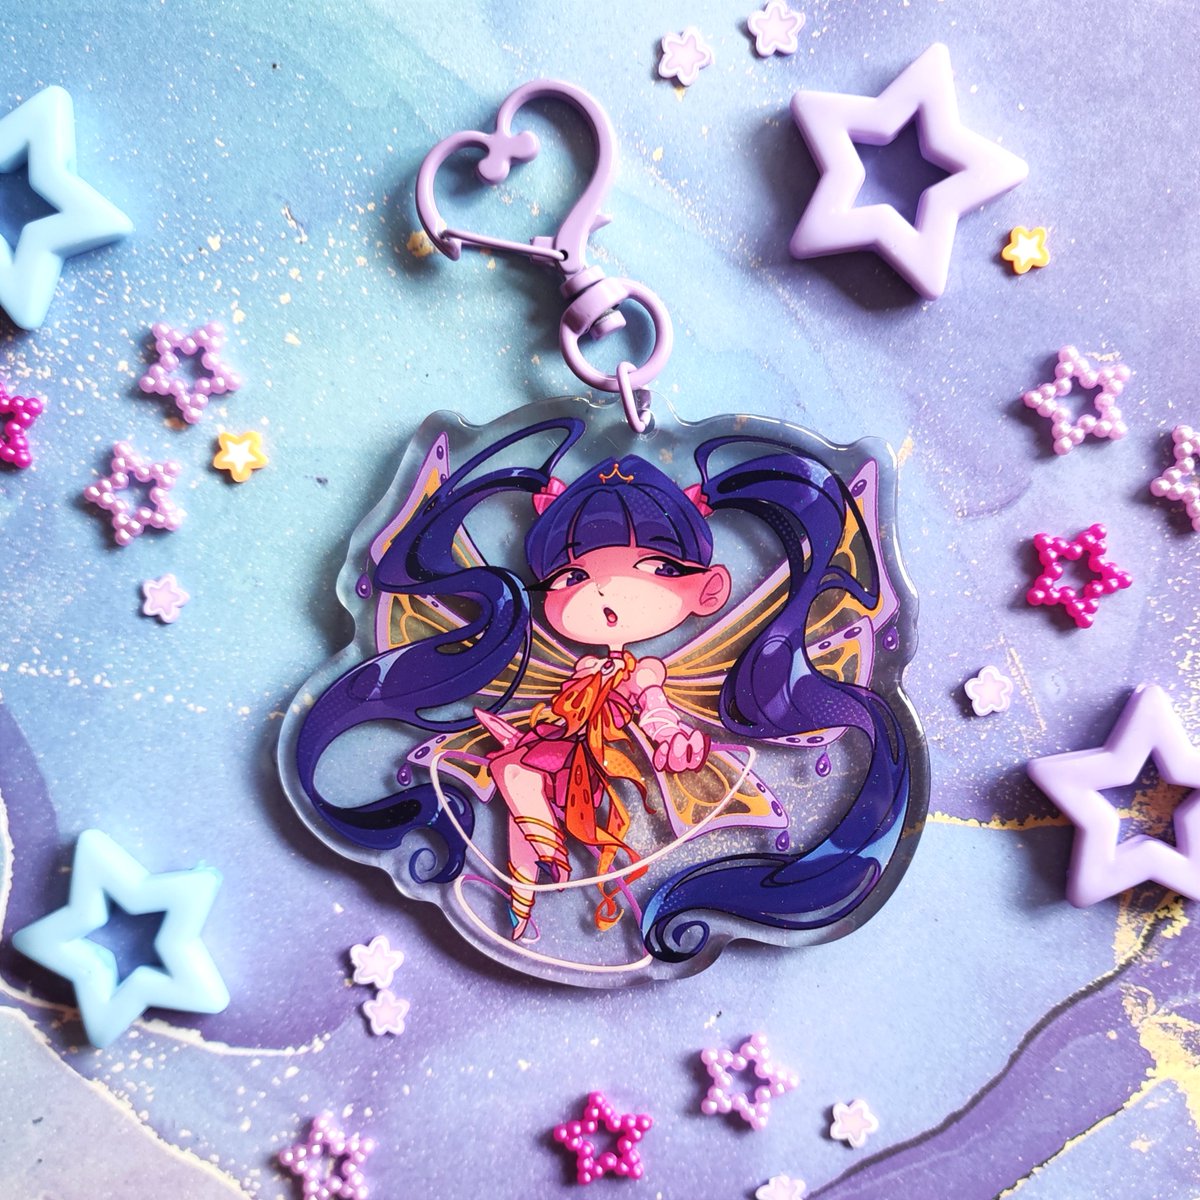 WINX | ENCHANTIX ! ✨ Keychains finally available worldwide at my st0re !! (Wings are translucent 😳) 💗 L1nk below ↓